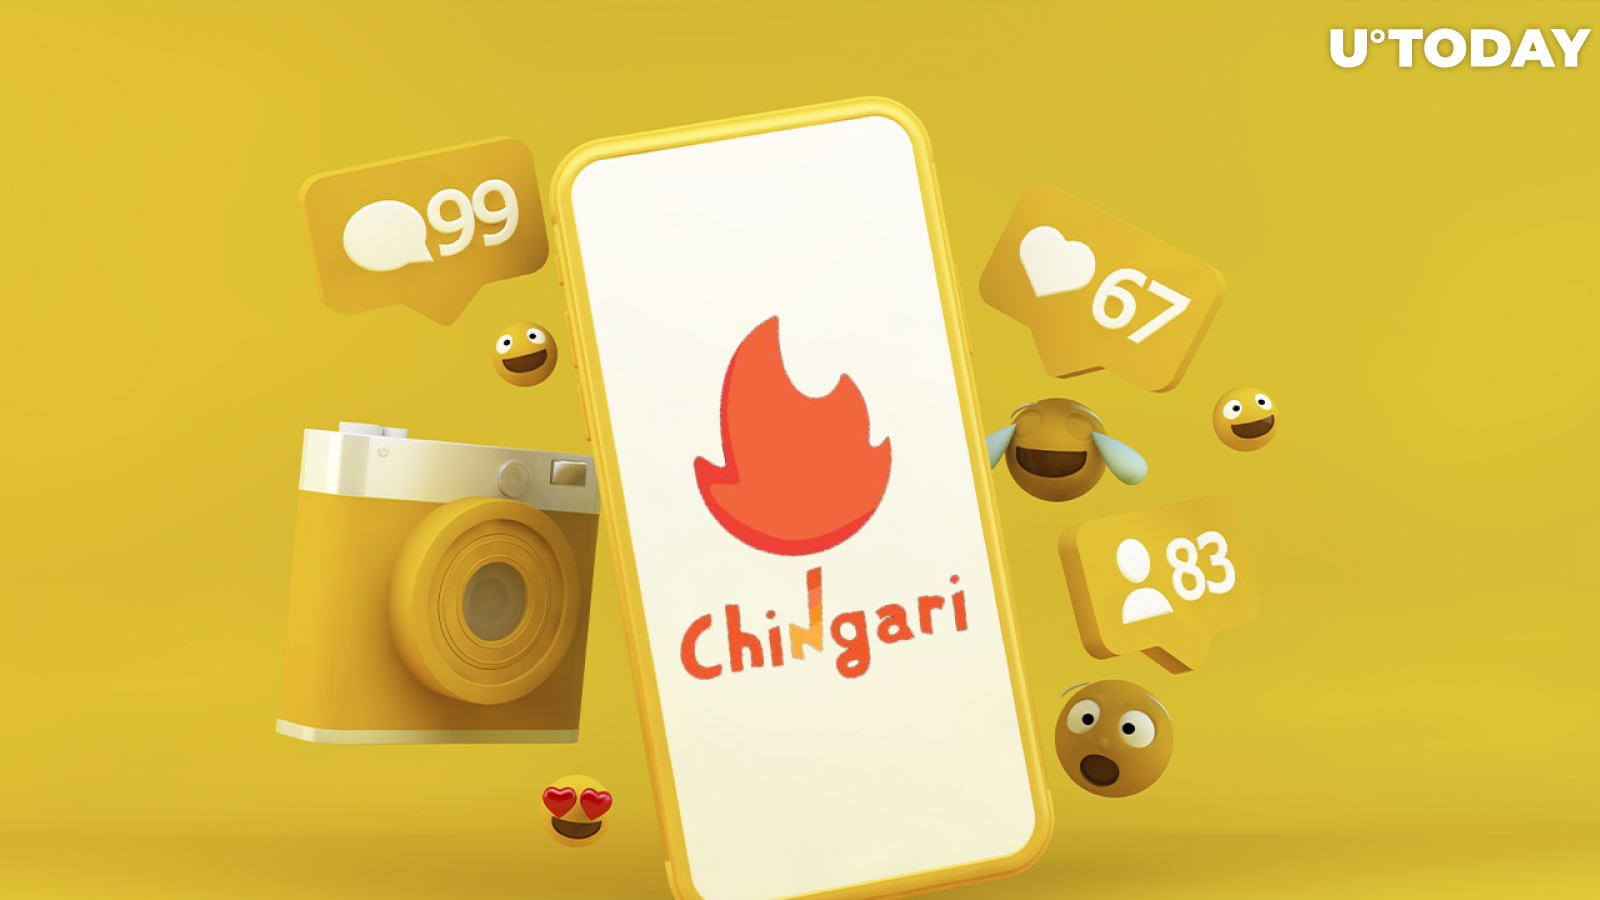 Chingari Social Media Application Becomes One of Biggest IDOs on Solrazr Launchpad by Raising $4 Million in 15 Minutes